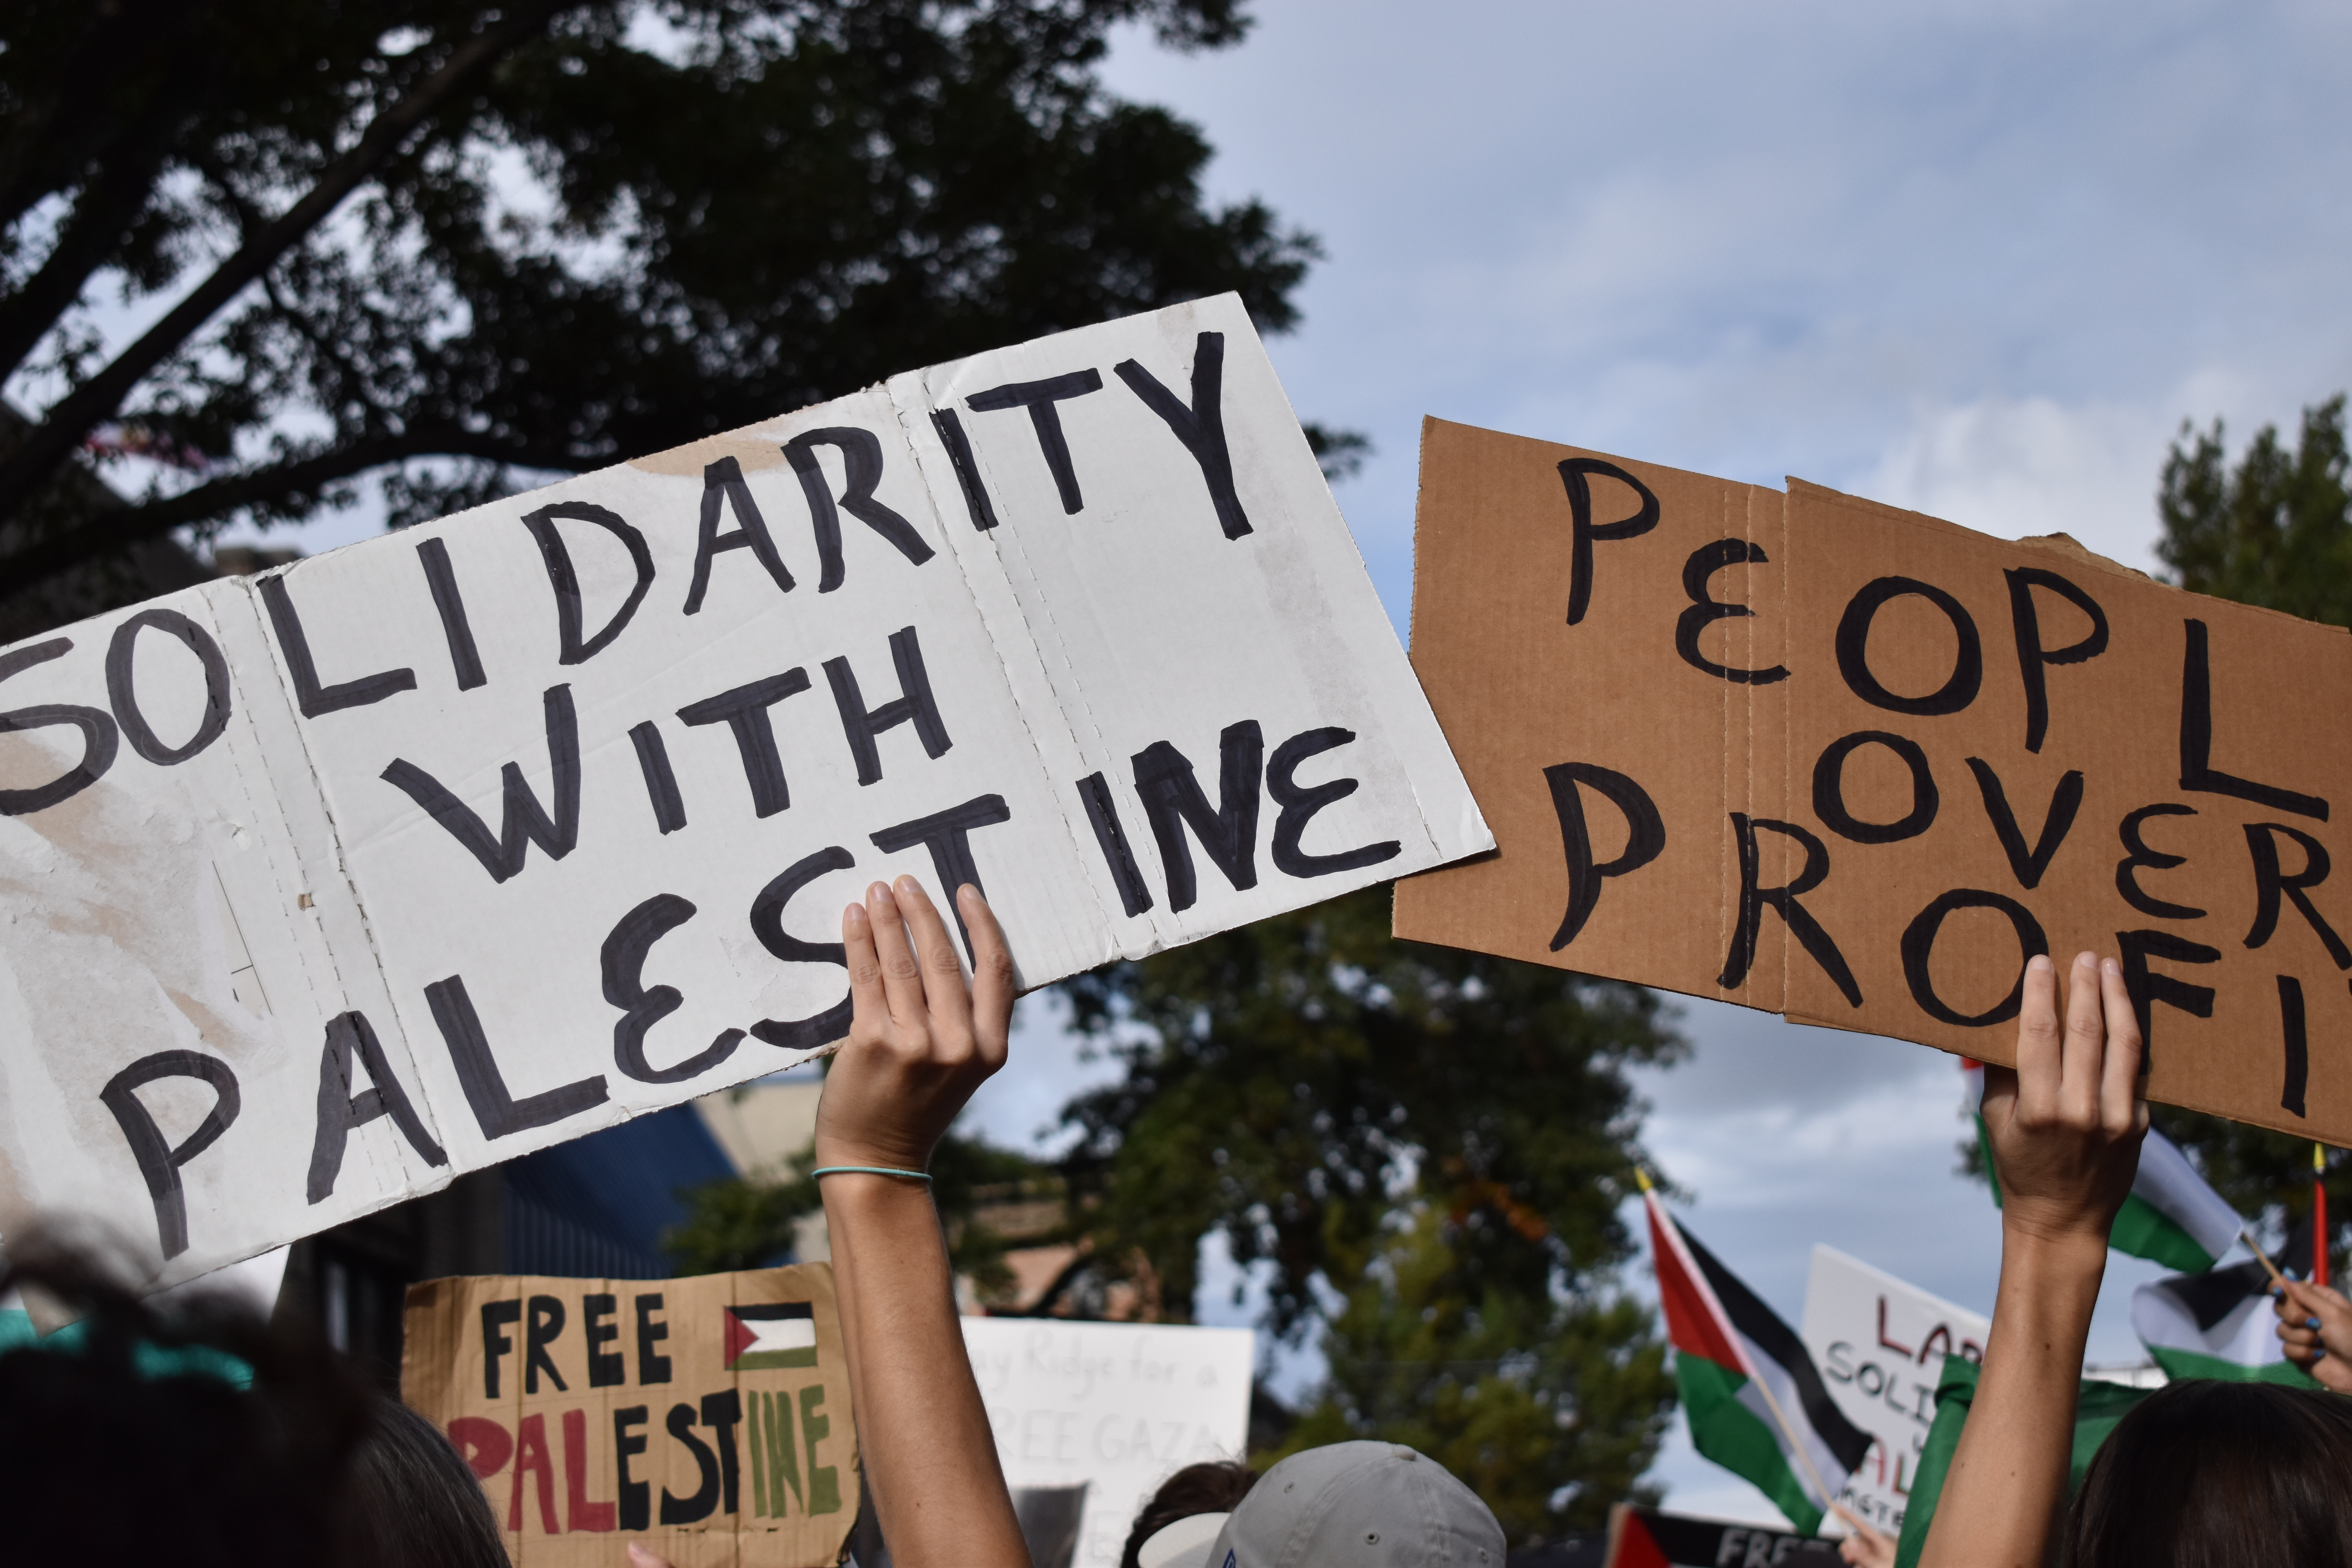 Why Puerto Ricans are protesting Israel, supporting Palestine